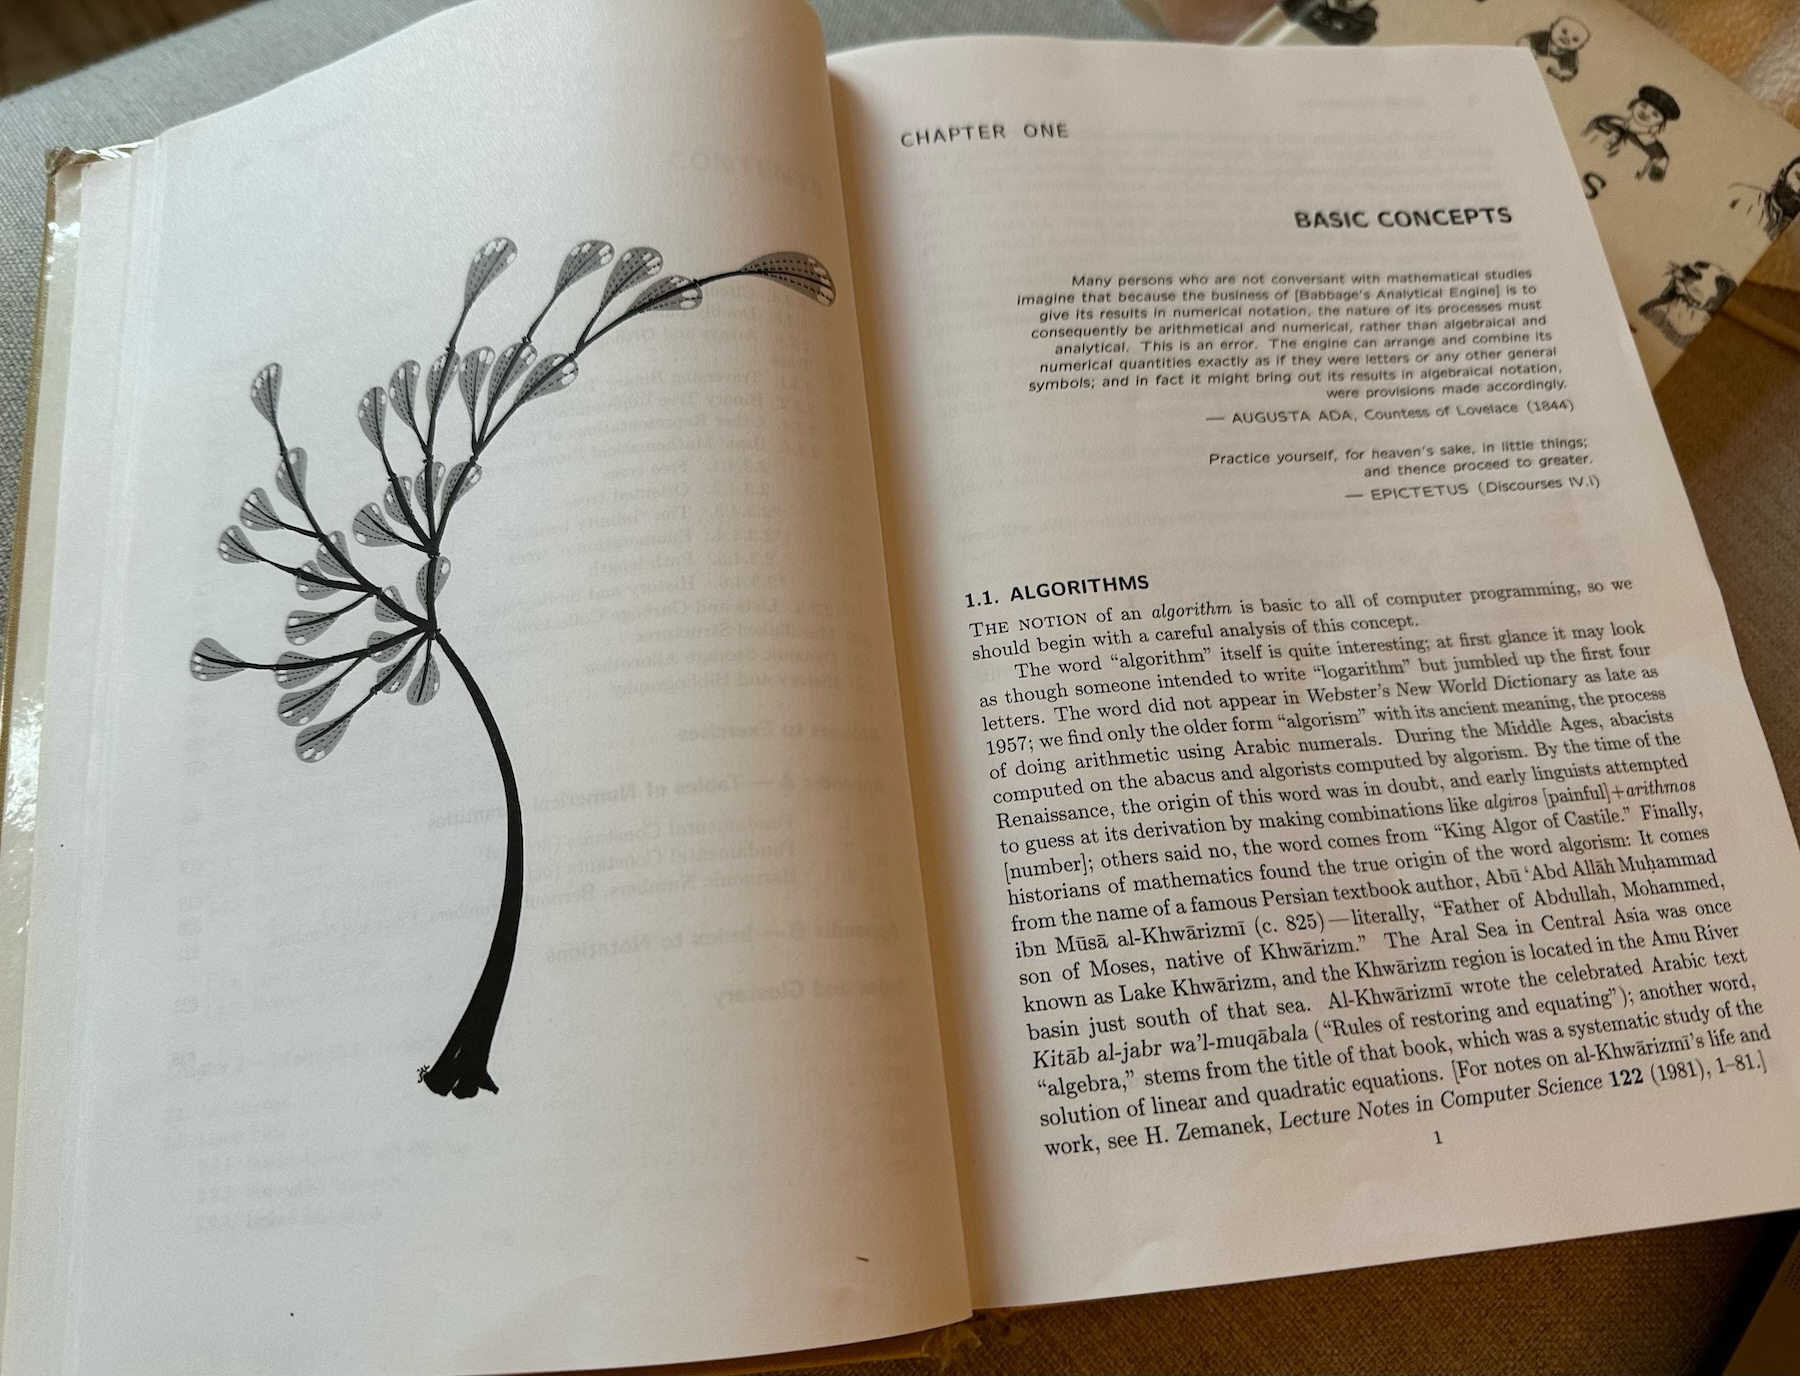 The first page of Chapter One of The Art of Computer Programming, has a interpretative image of a tree with flowing branches